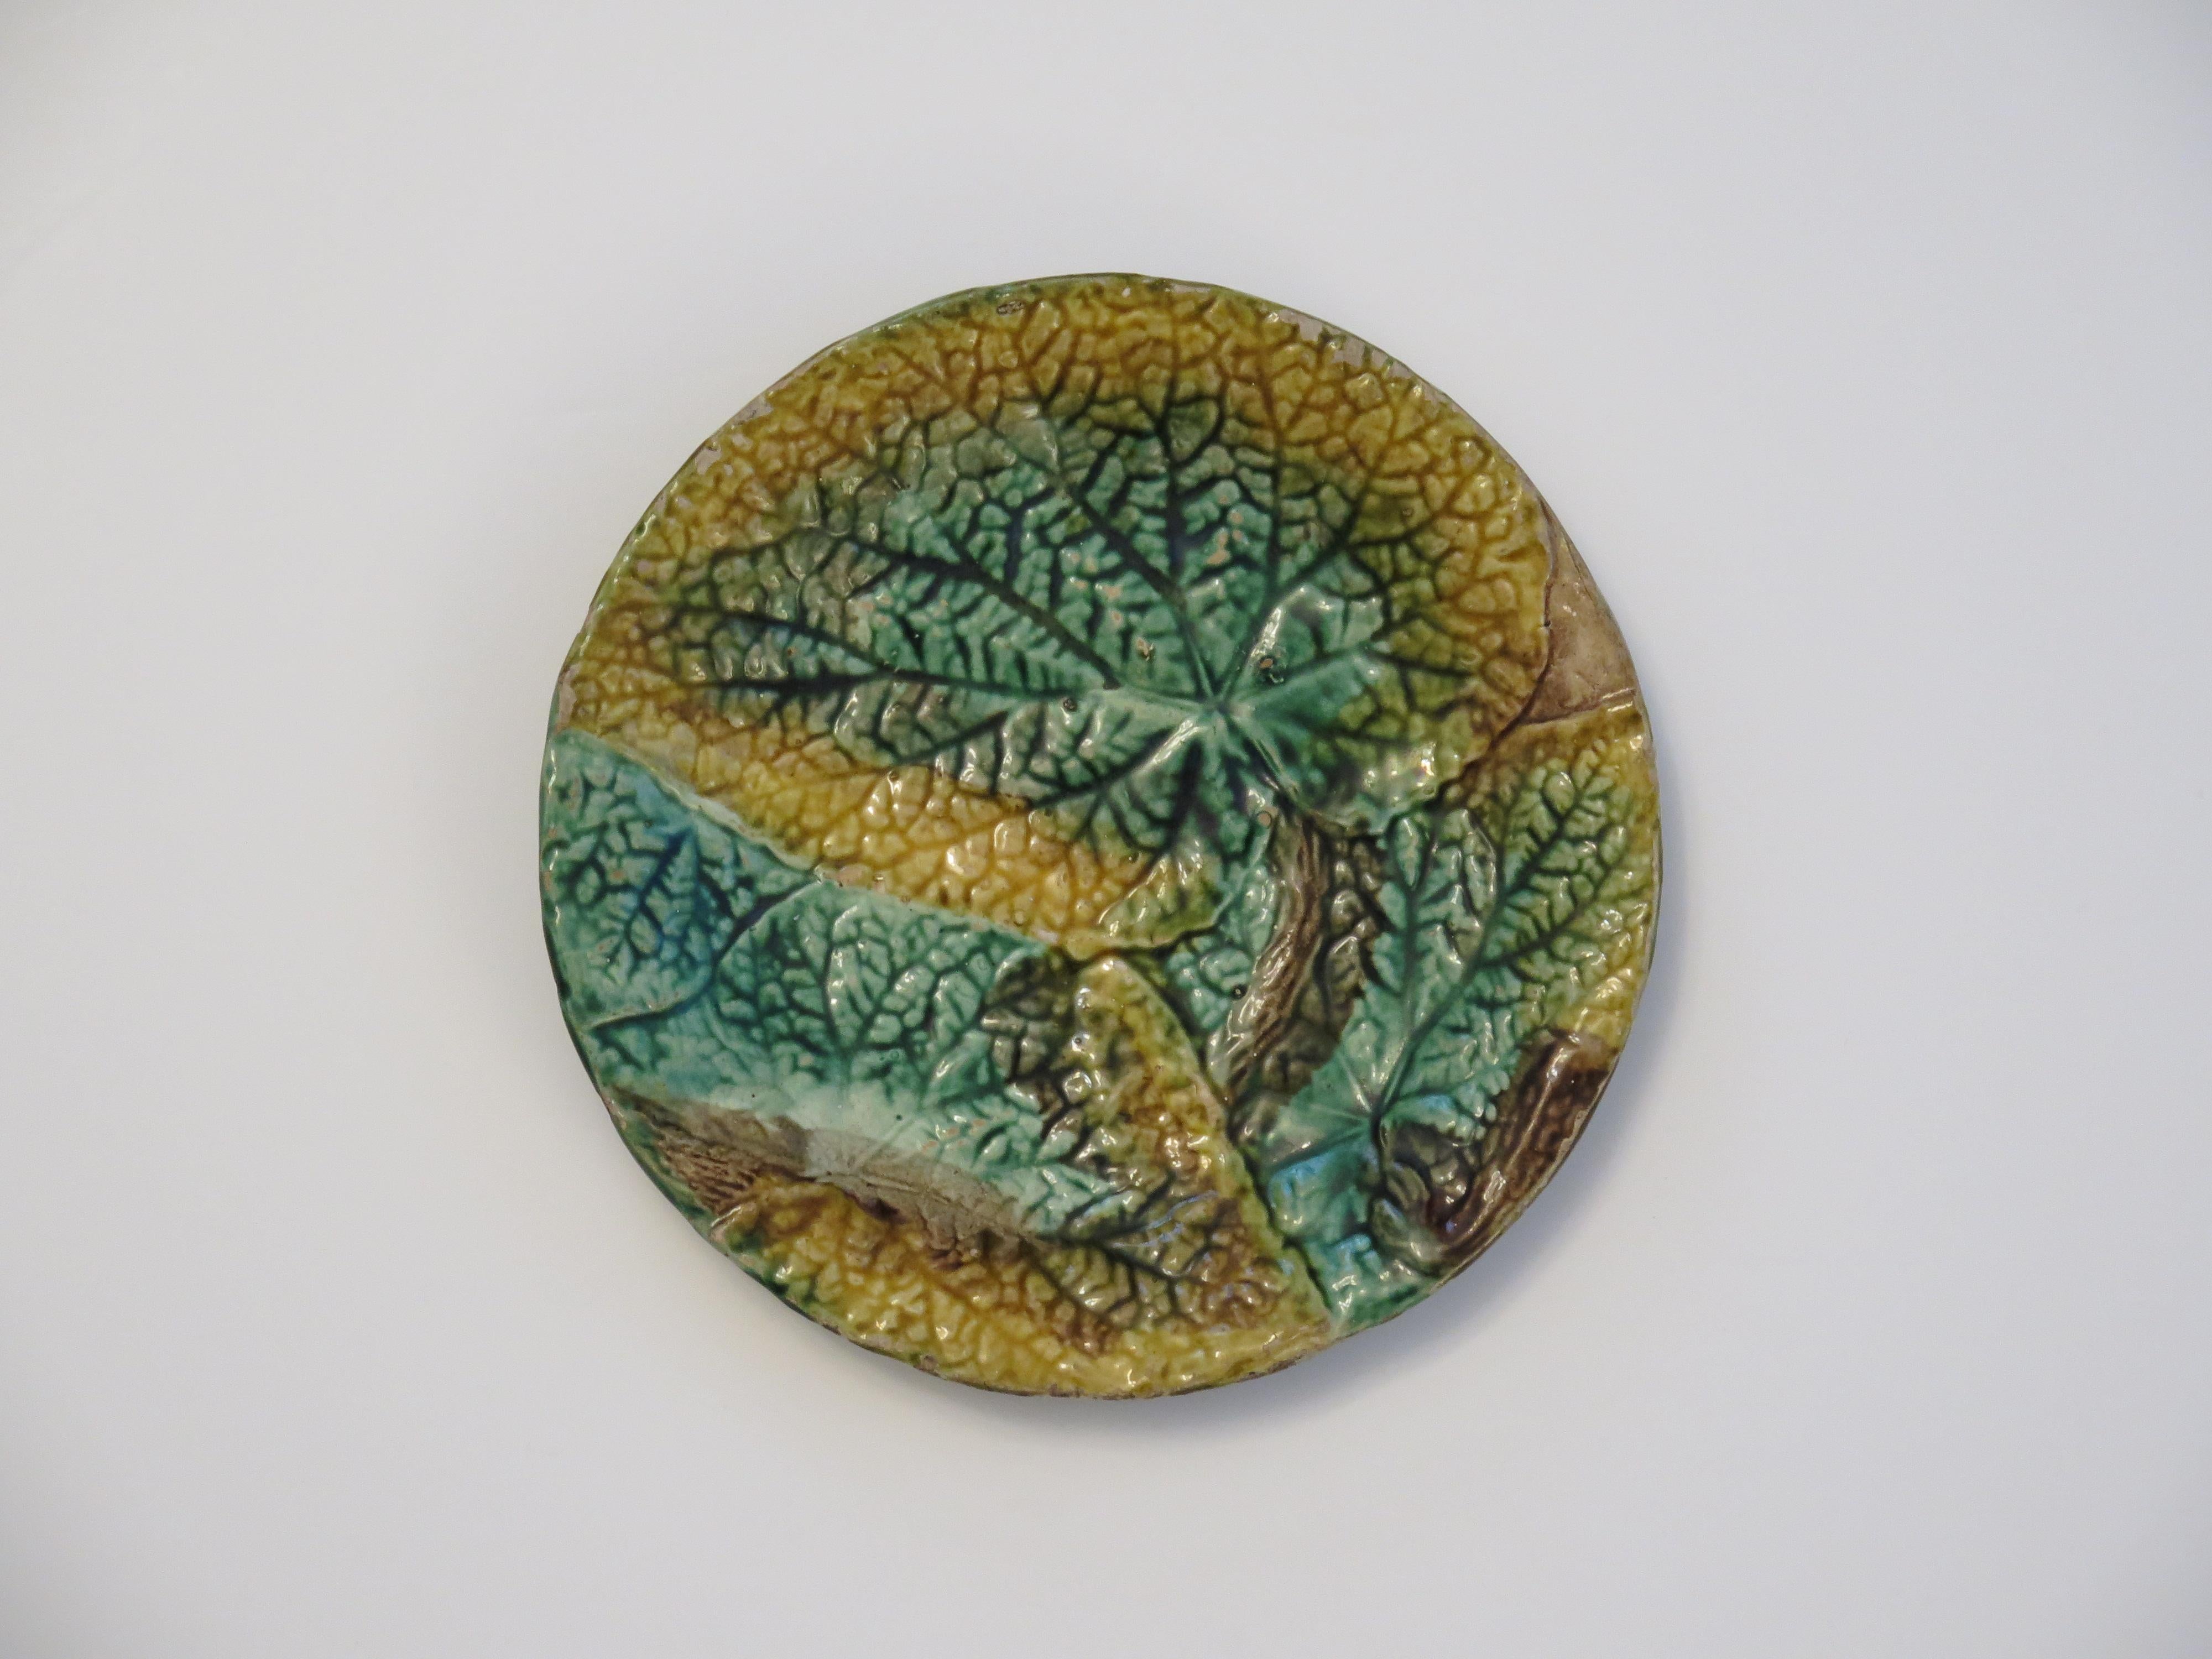 Hand-Painted George Jones antique Majolica Plate in Begonia Leaf pattern, Circa 1870 For Sale